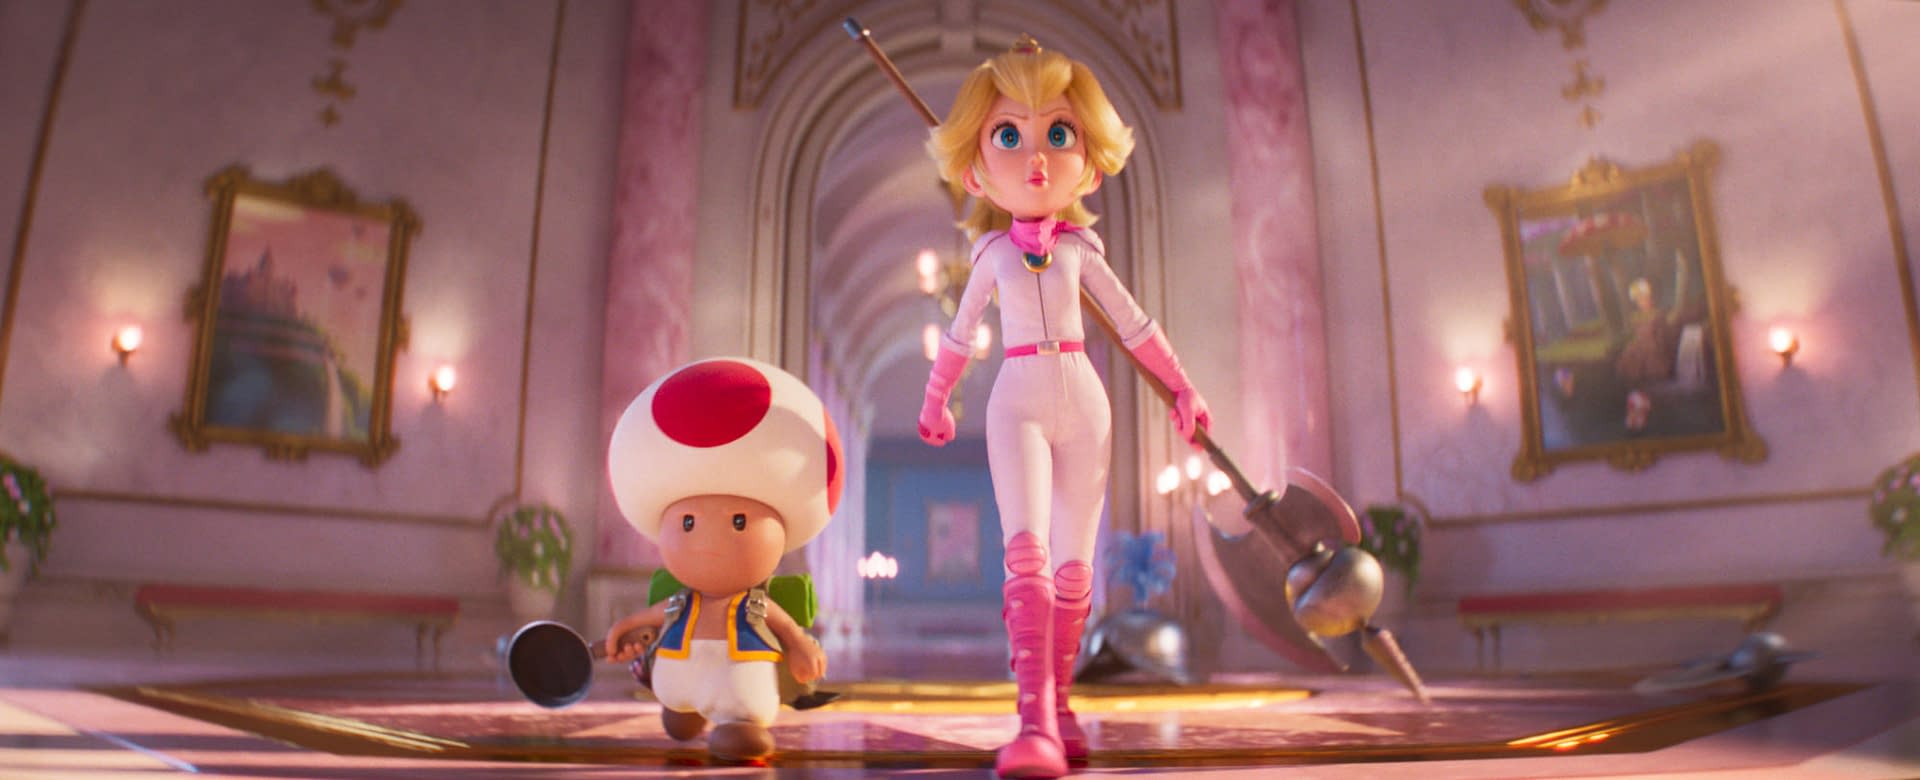 The Story Behind the Super Mario Bros. Movie Extended Cut